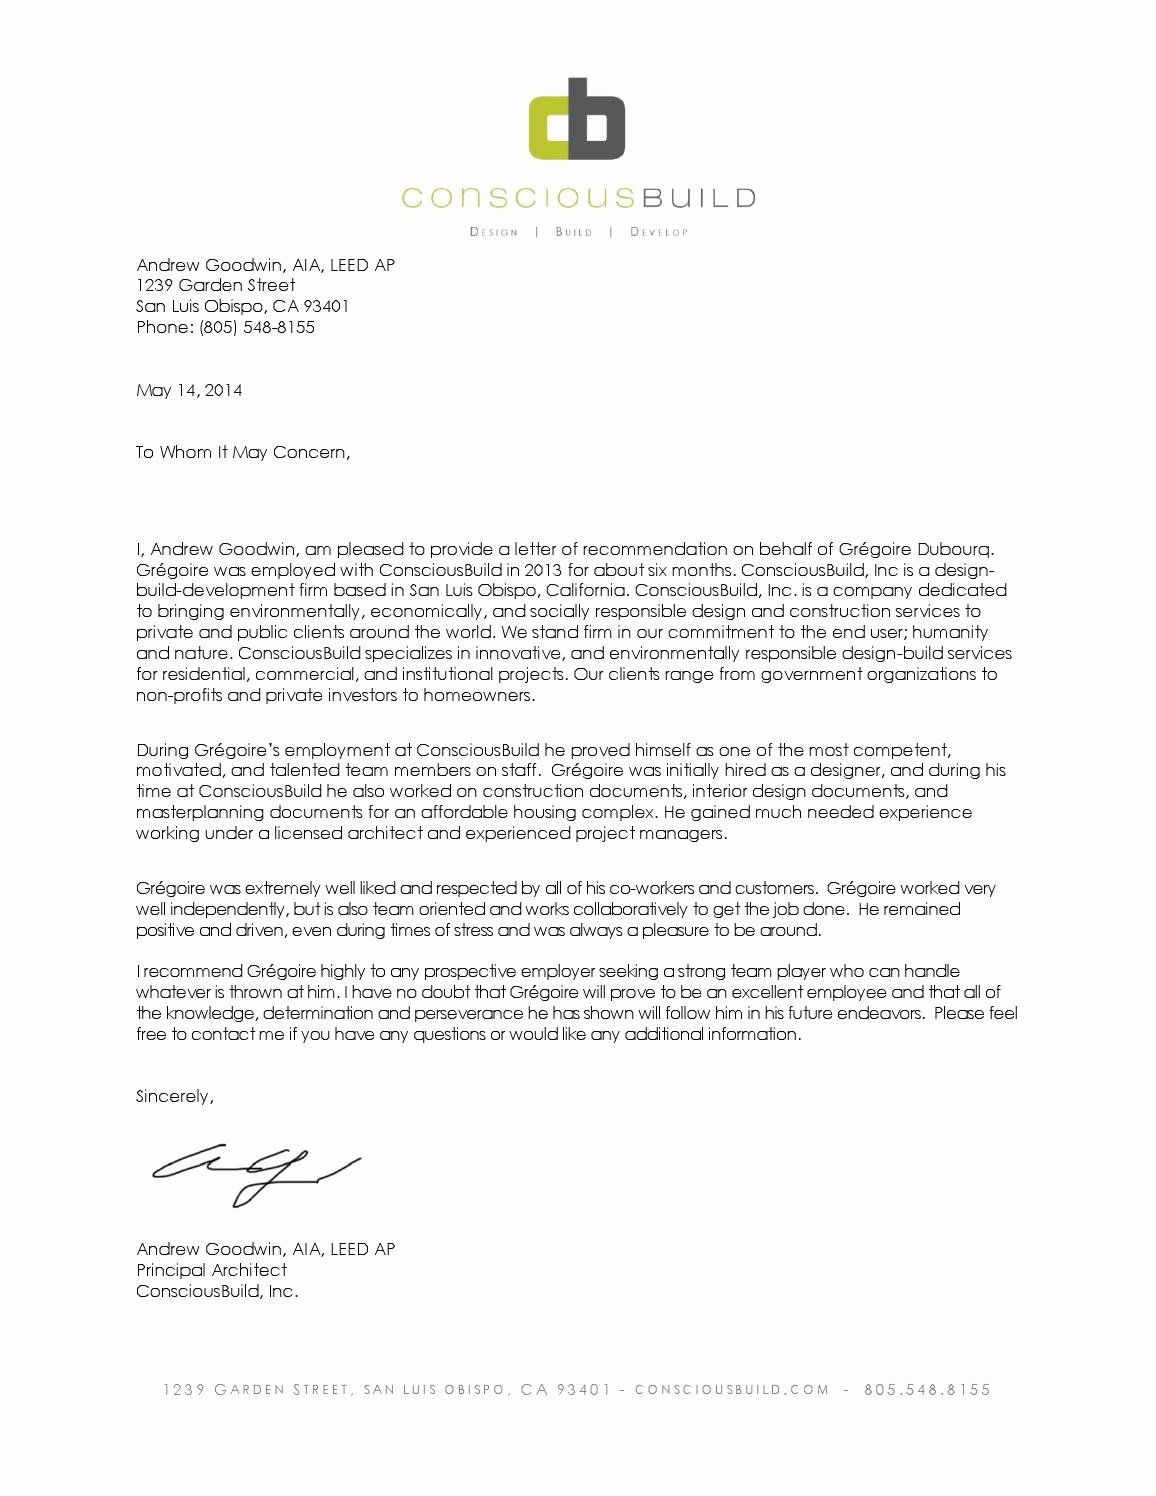 Leed Letter Templates New Letter Of Re Mendation Intern Architect by Gregoire